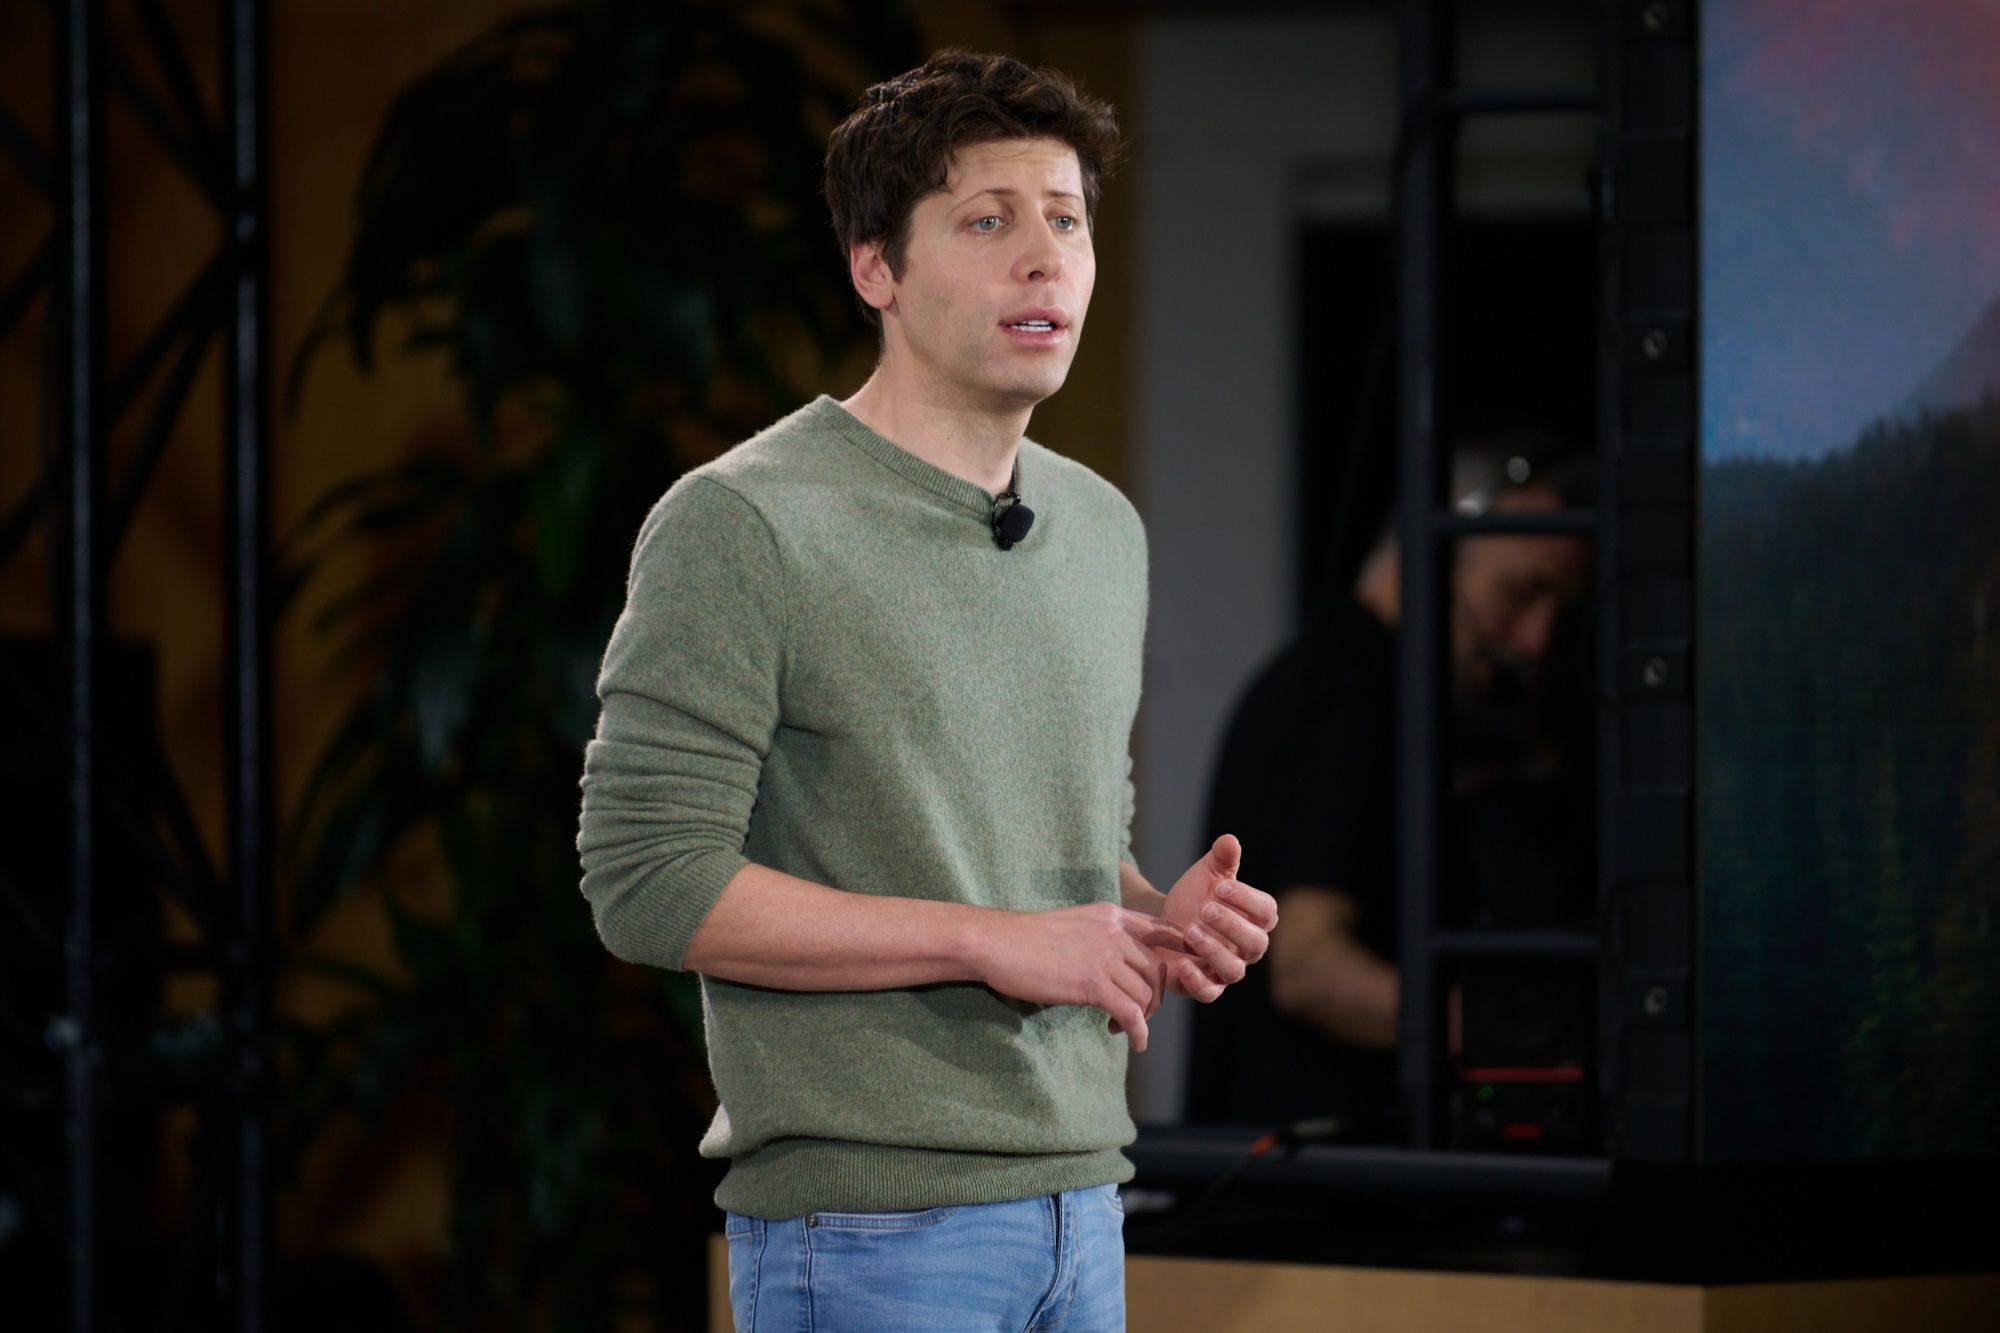 Sam Altman, CEO and co-founder of Open AI, speaks during an event at the Microsoft headquarters in Redmond, Washington in February. Photo: Bloomberg